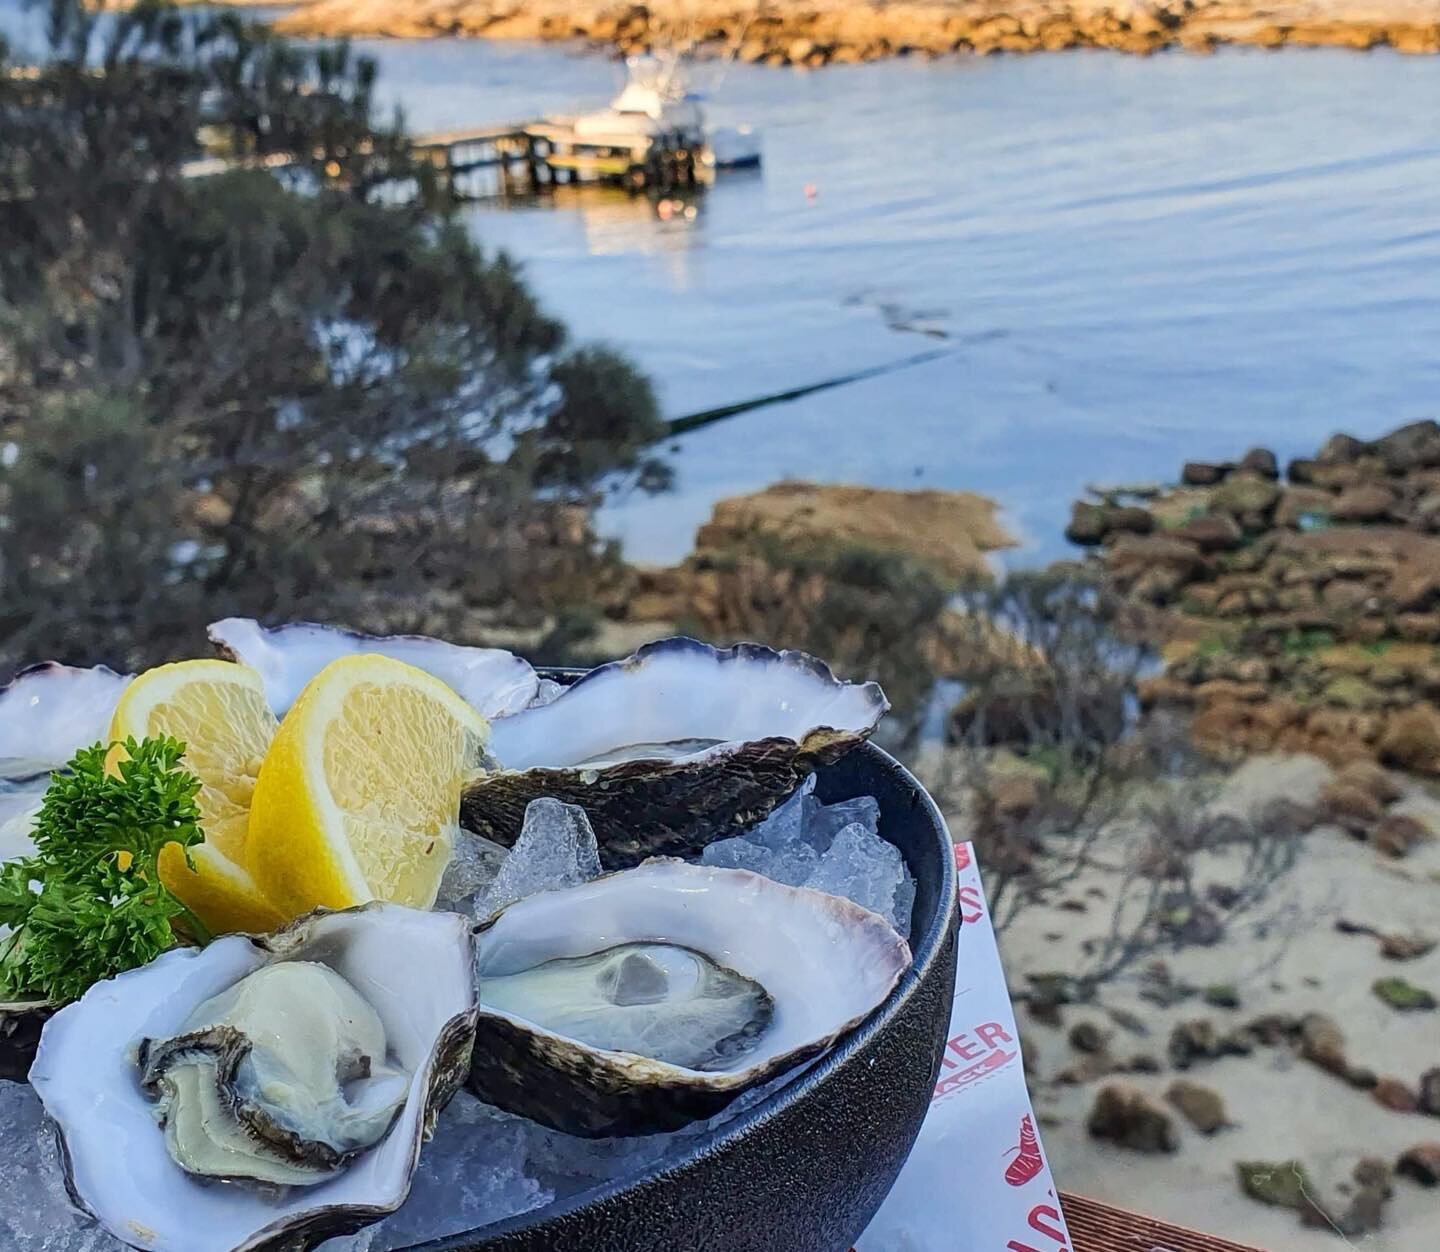 The world is your oyster! come and celebrate World Oyster Day with us Friday 5th of Aug. Winter is an amazing time for these magnificent pacific oysters grown in Tasmania fresh, smooth, natural with a dash of lemon washed down with a magnificent cris